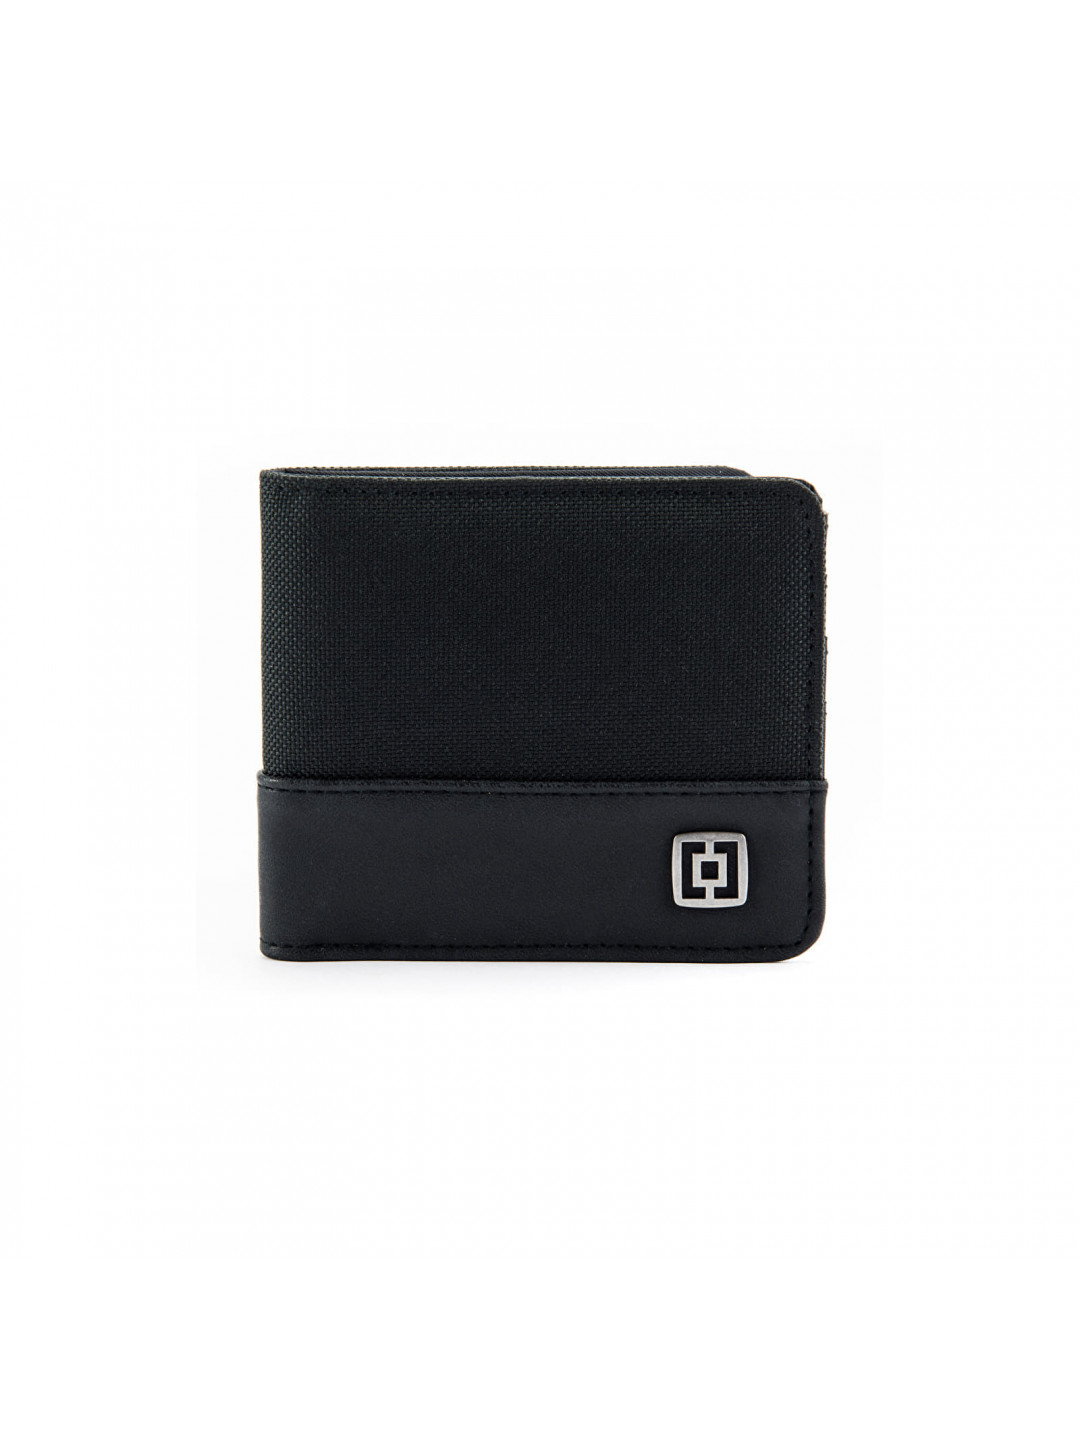 Horsefeathers Terry Wallet Black